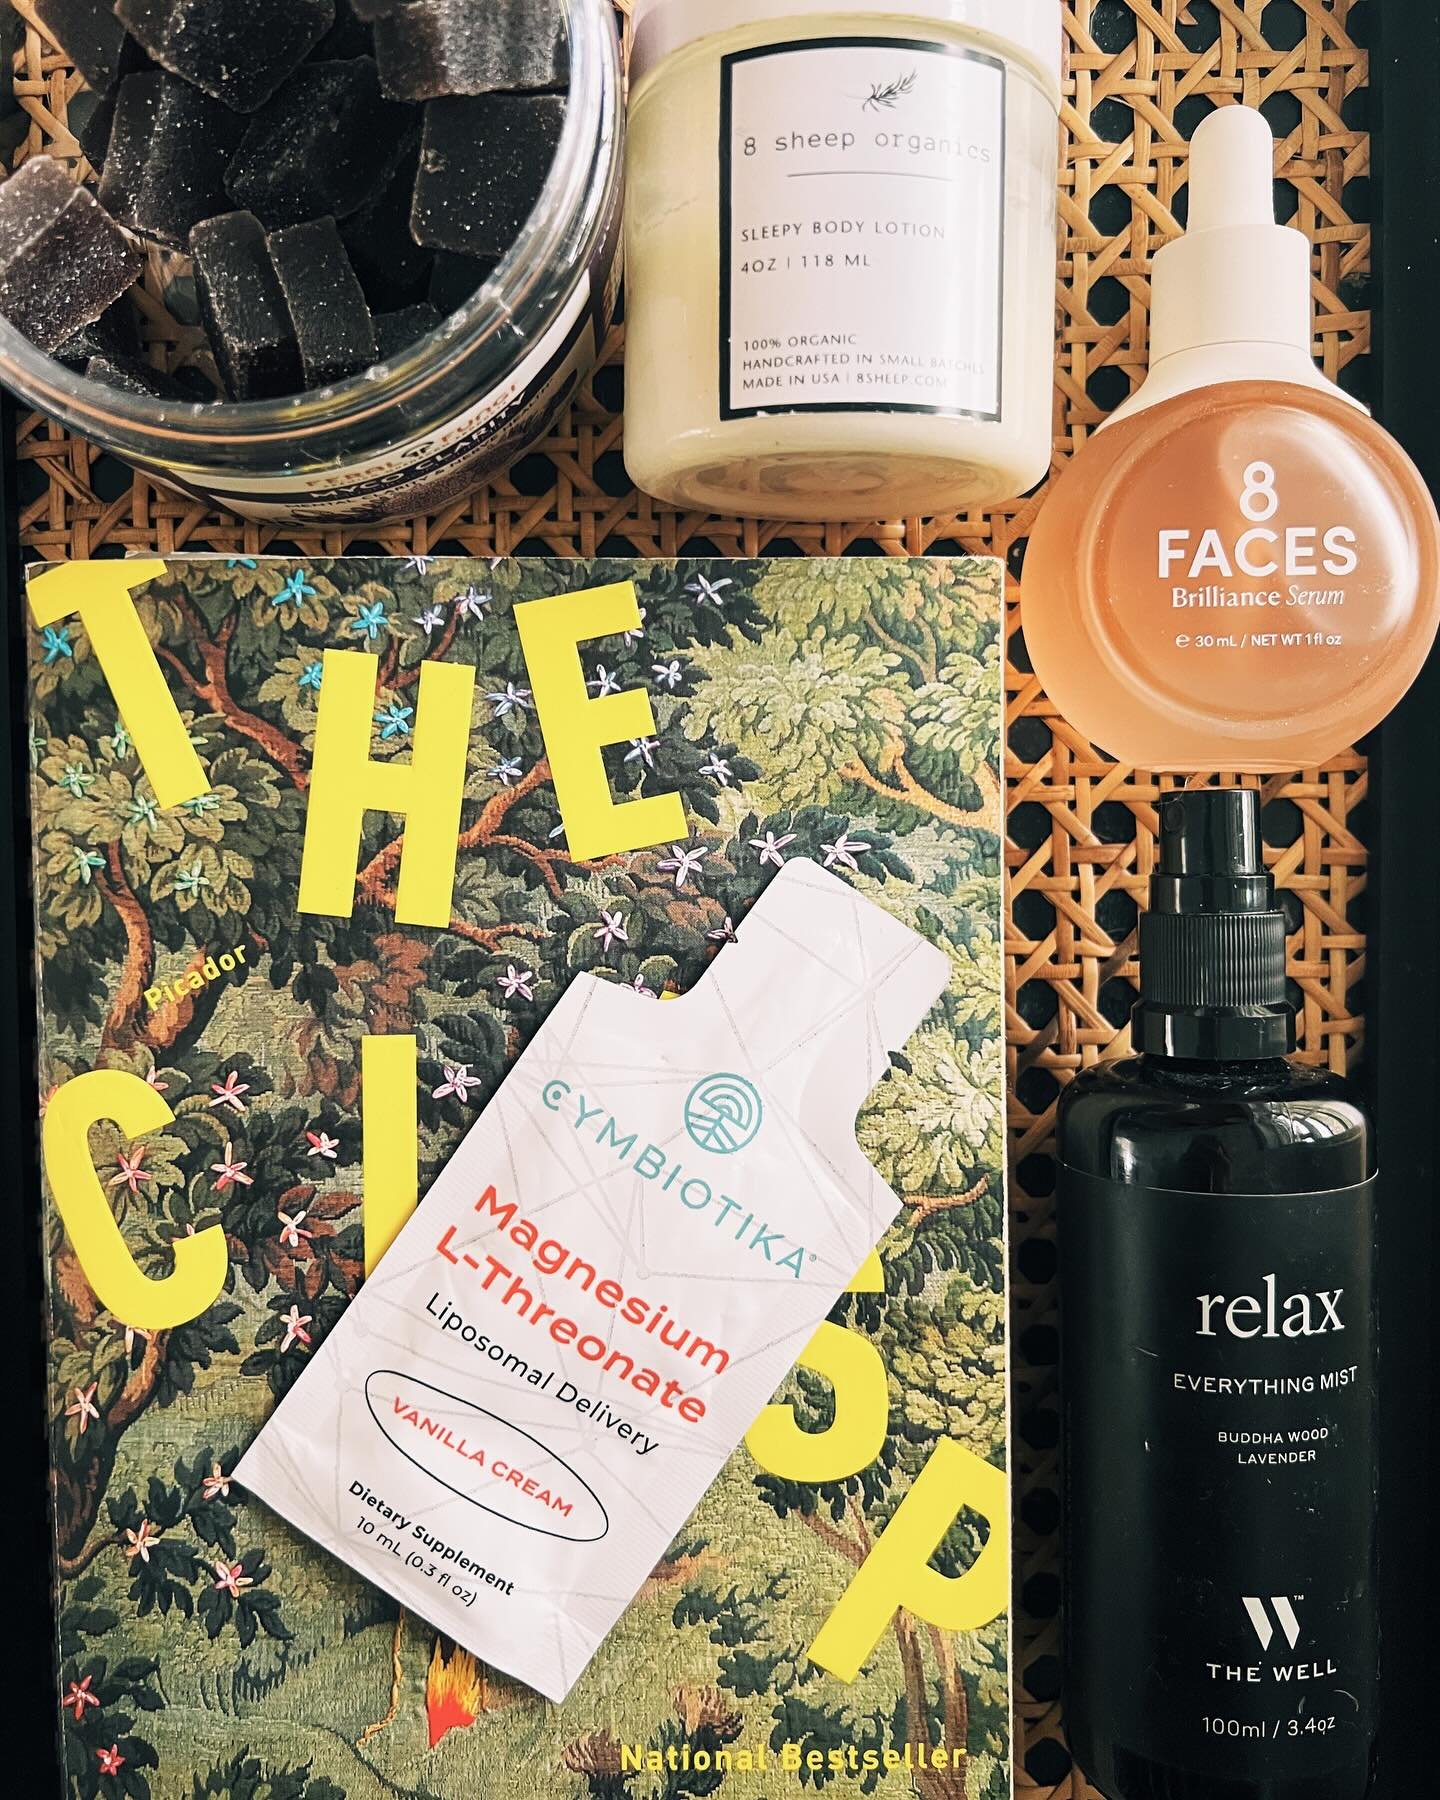 Bedtime rituals and little luxuries that I&rsquo;m loving lately:
@fantasticfungi for clarity and calm (take any time of day)
@8sheeporganics for relaxation and sleep (rub on feet)
@8facesbeauty for superfood and moon infused skin magic (for the face